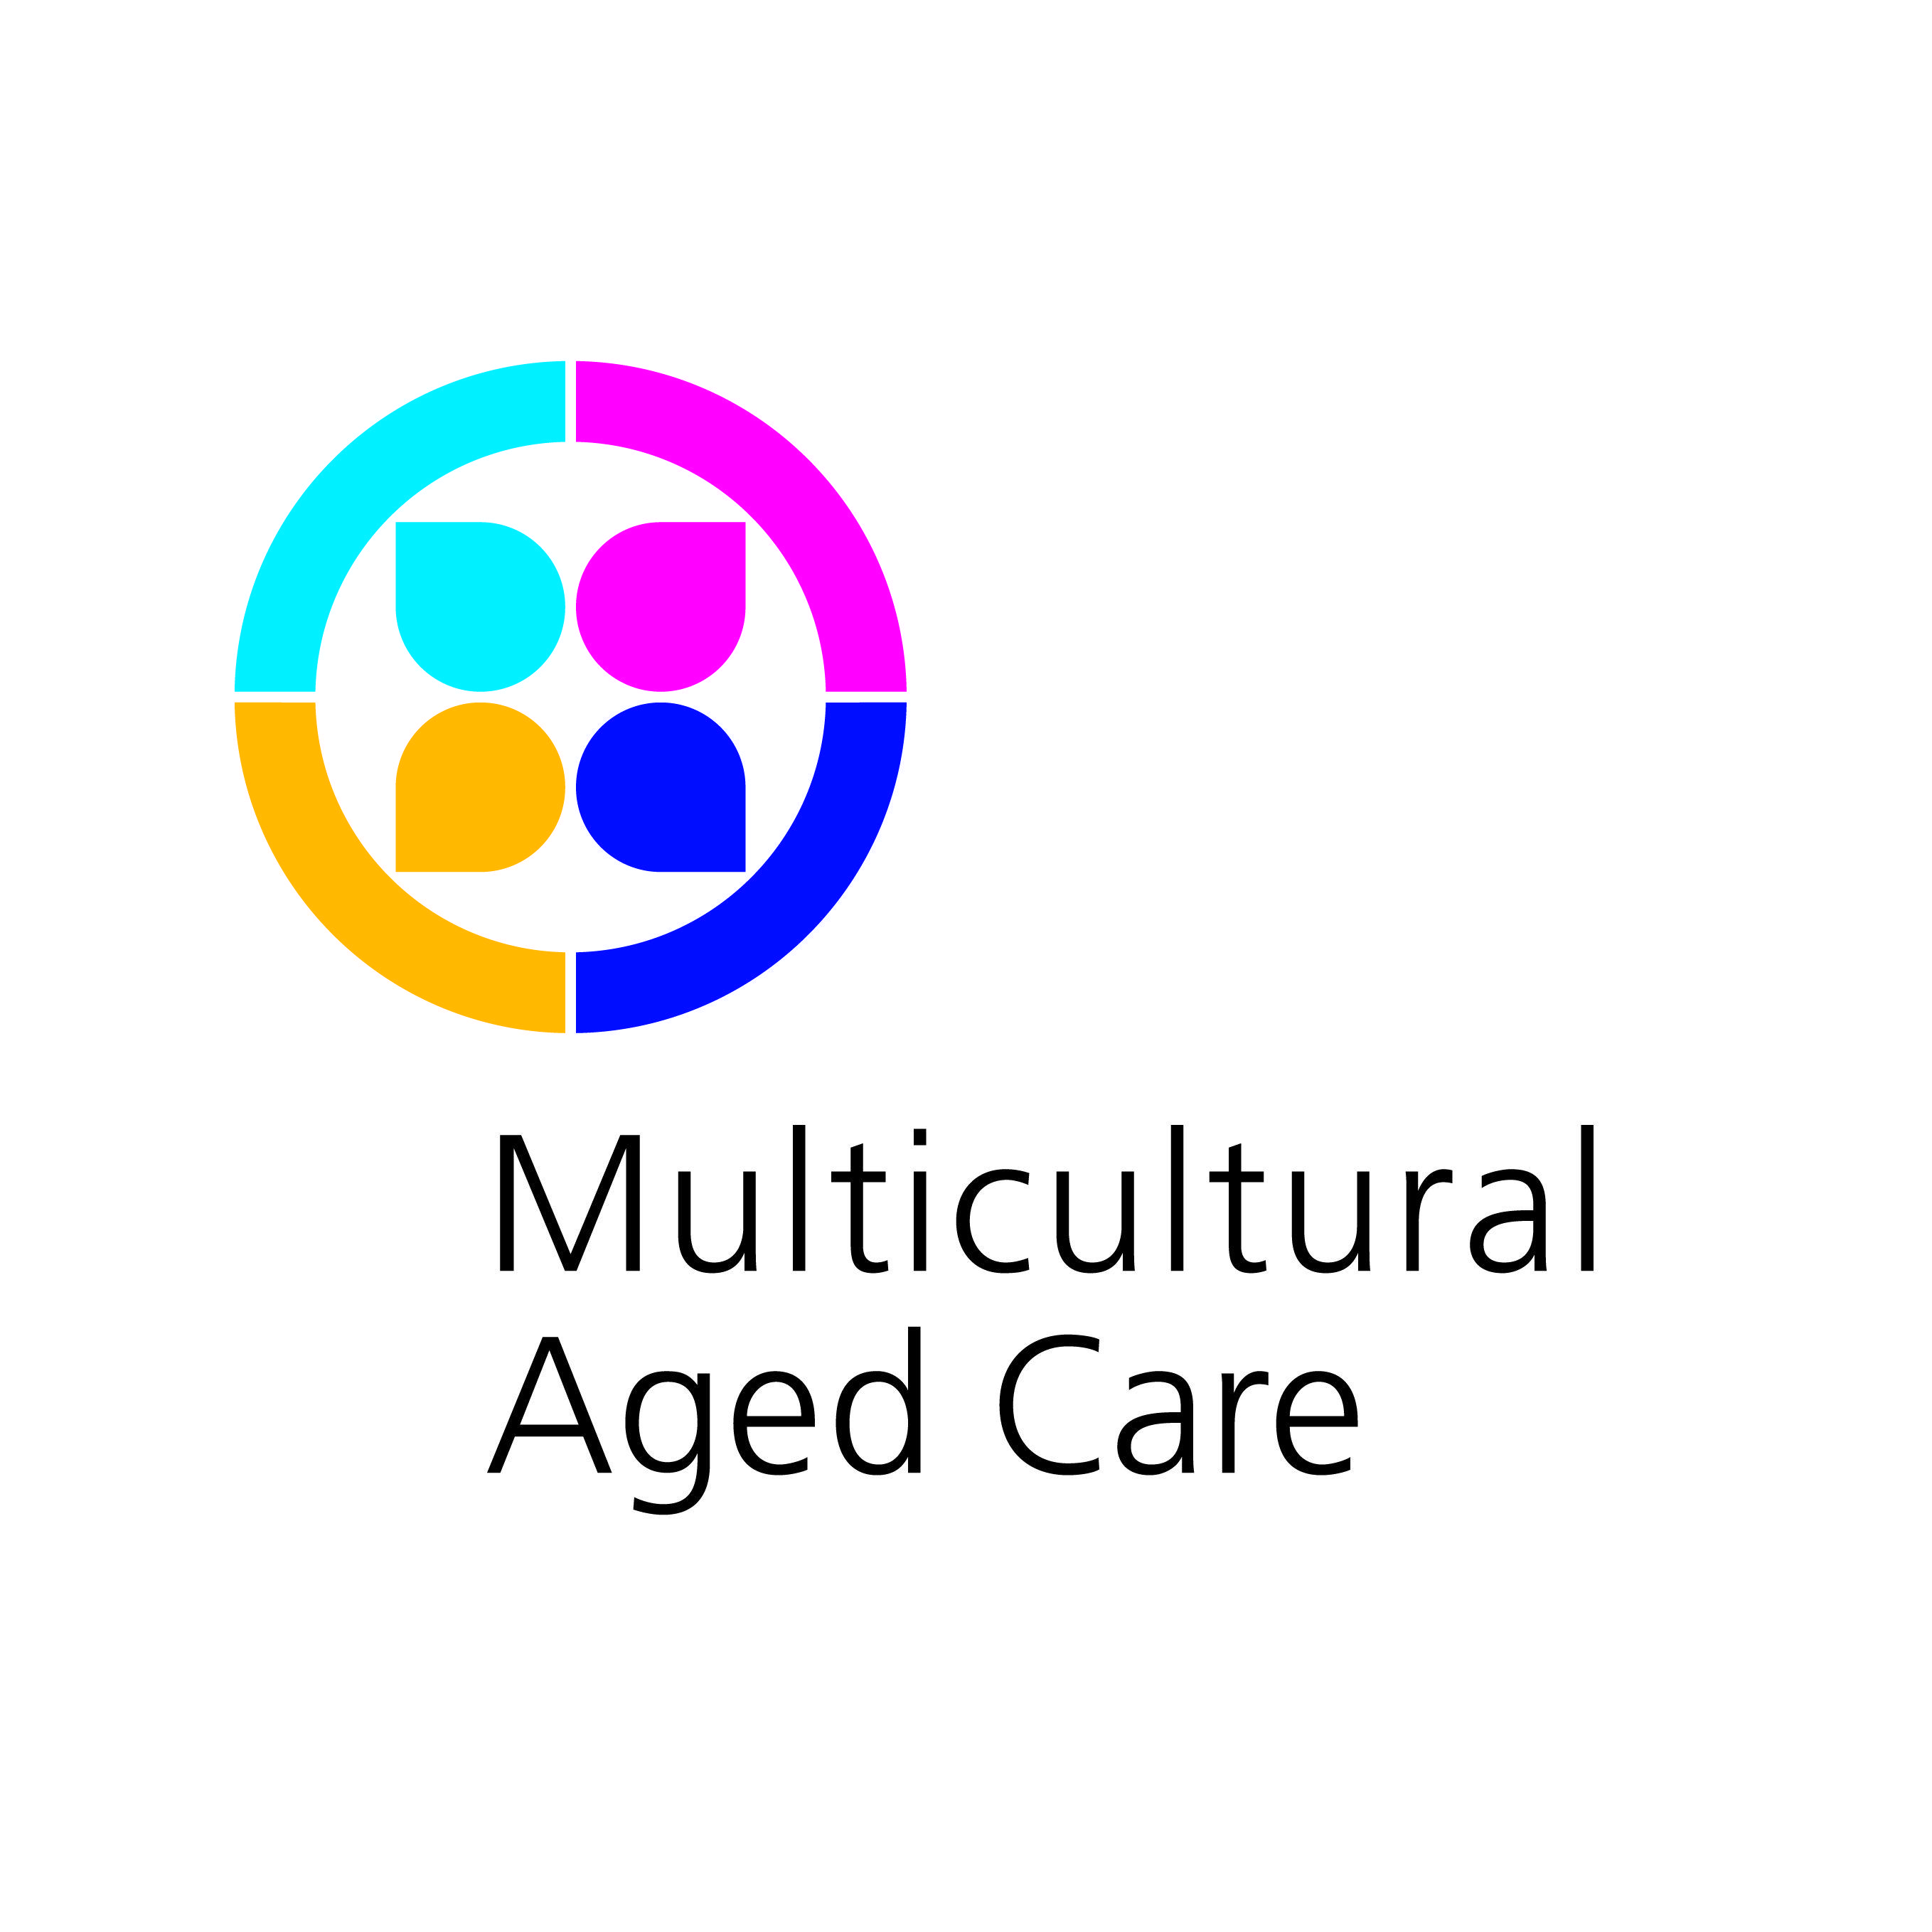 Aged Logo - Multicultural Aged Care | Respecting Diversity in Ageing